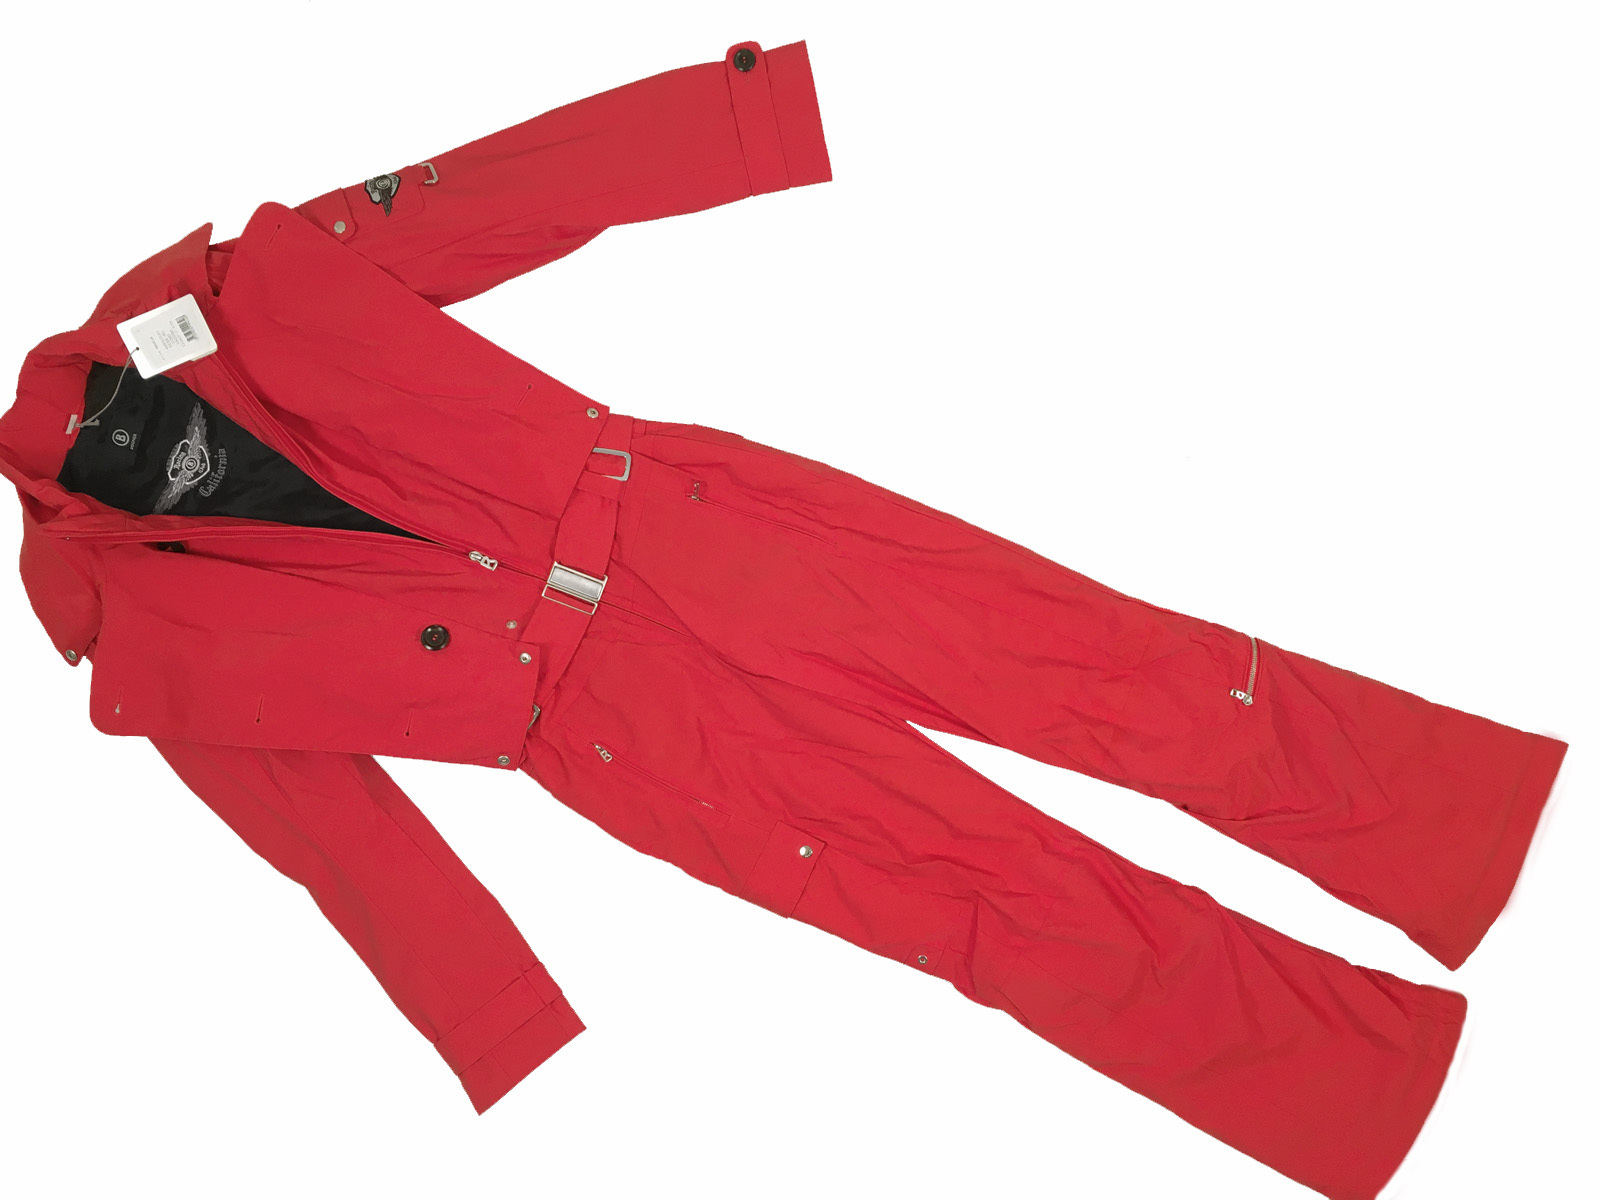 NEW $1599 Bogner Womens One Piece Ski Suit!  Size 6 Long  Red With Embroidery - $599.99